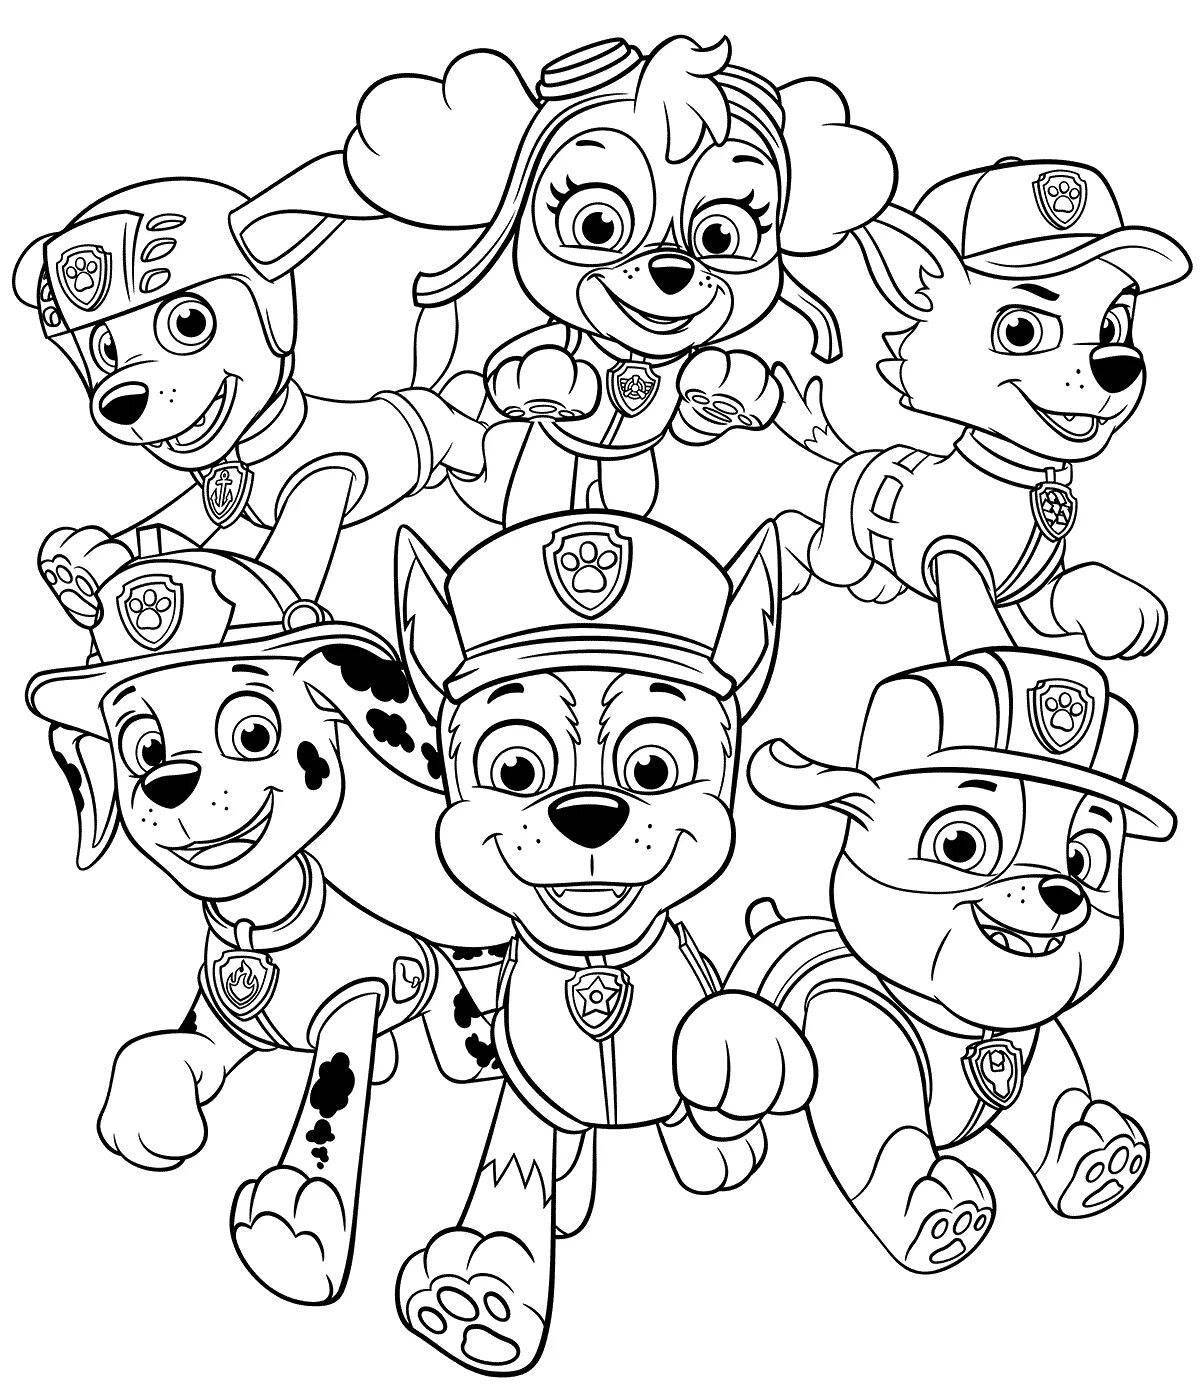 Colorful paw patrol puppies coloring book